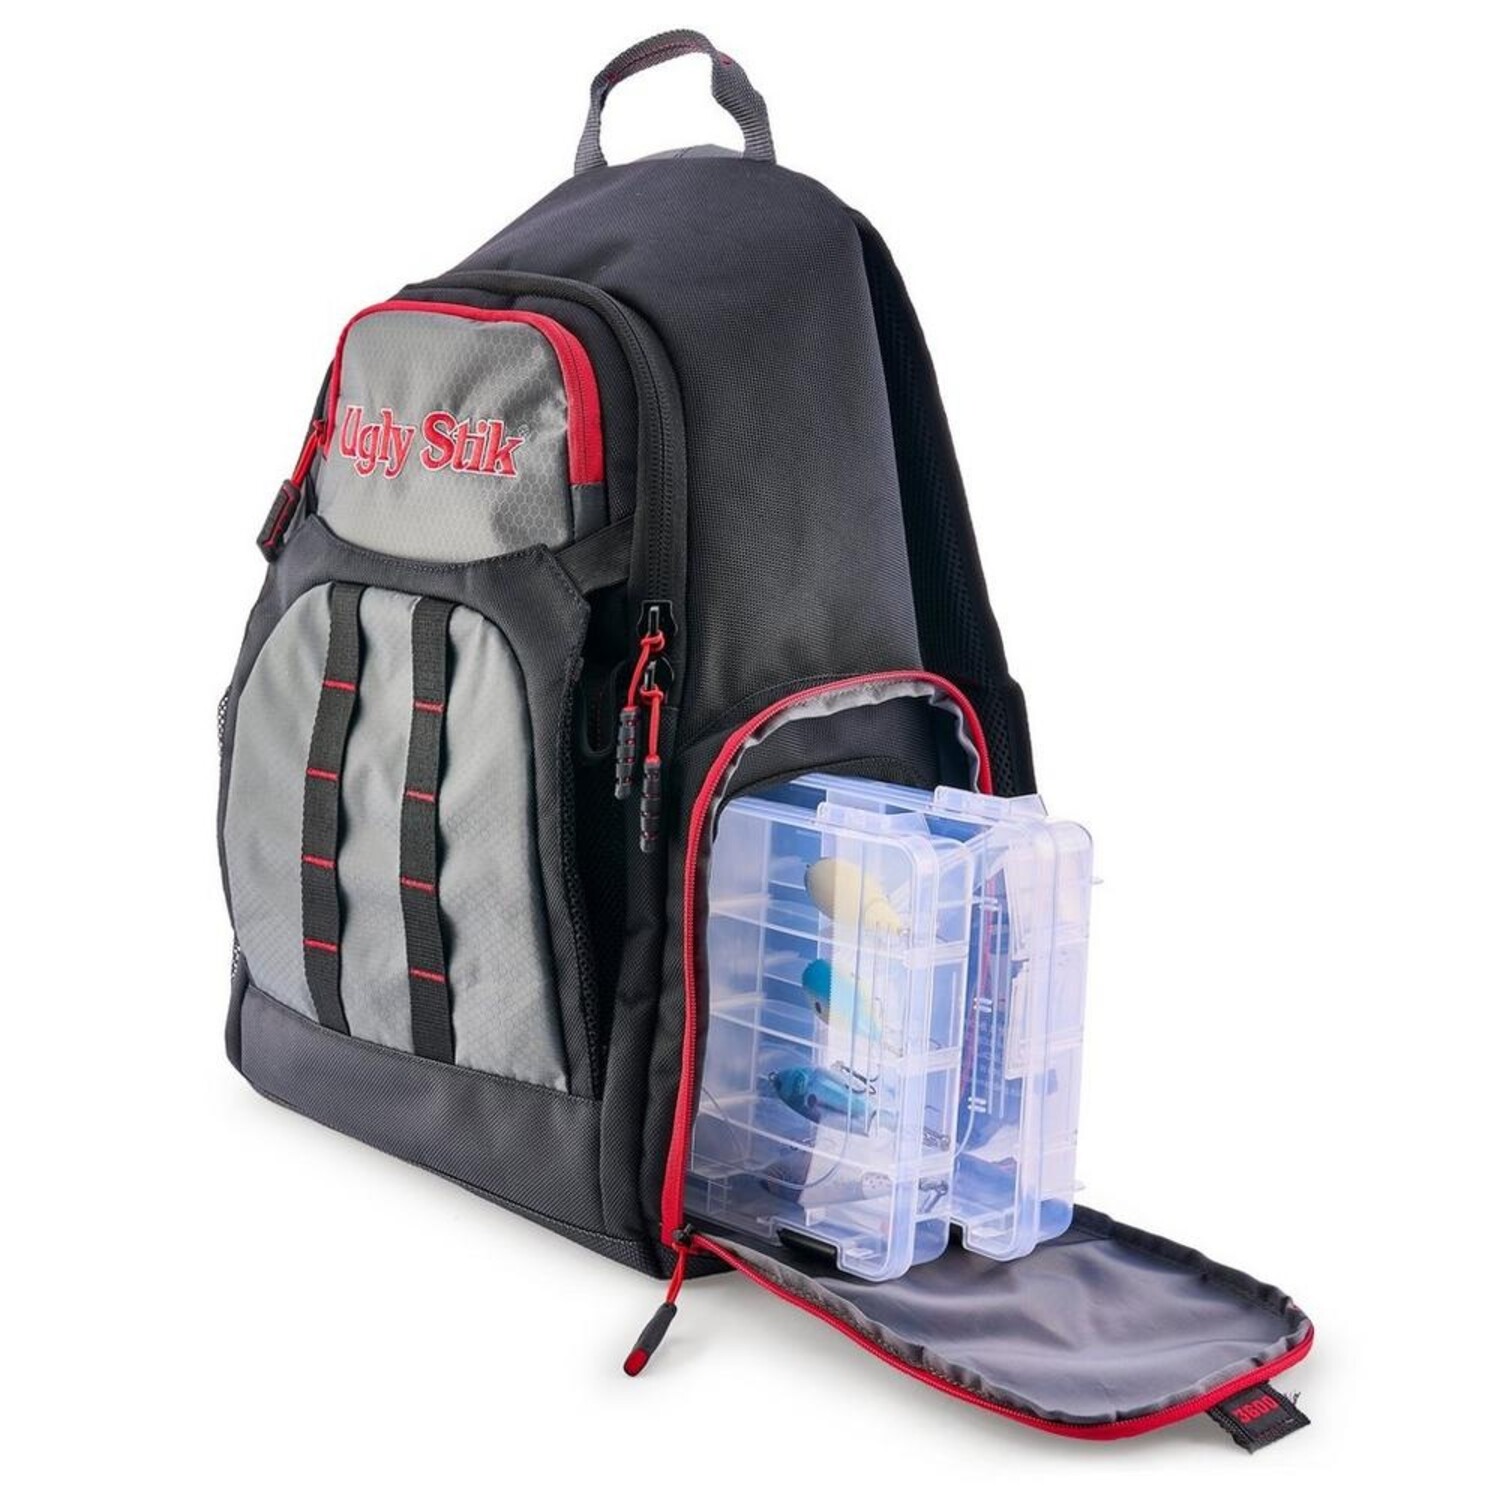 Ugly Stik Backpack Discount Factory